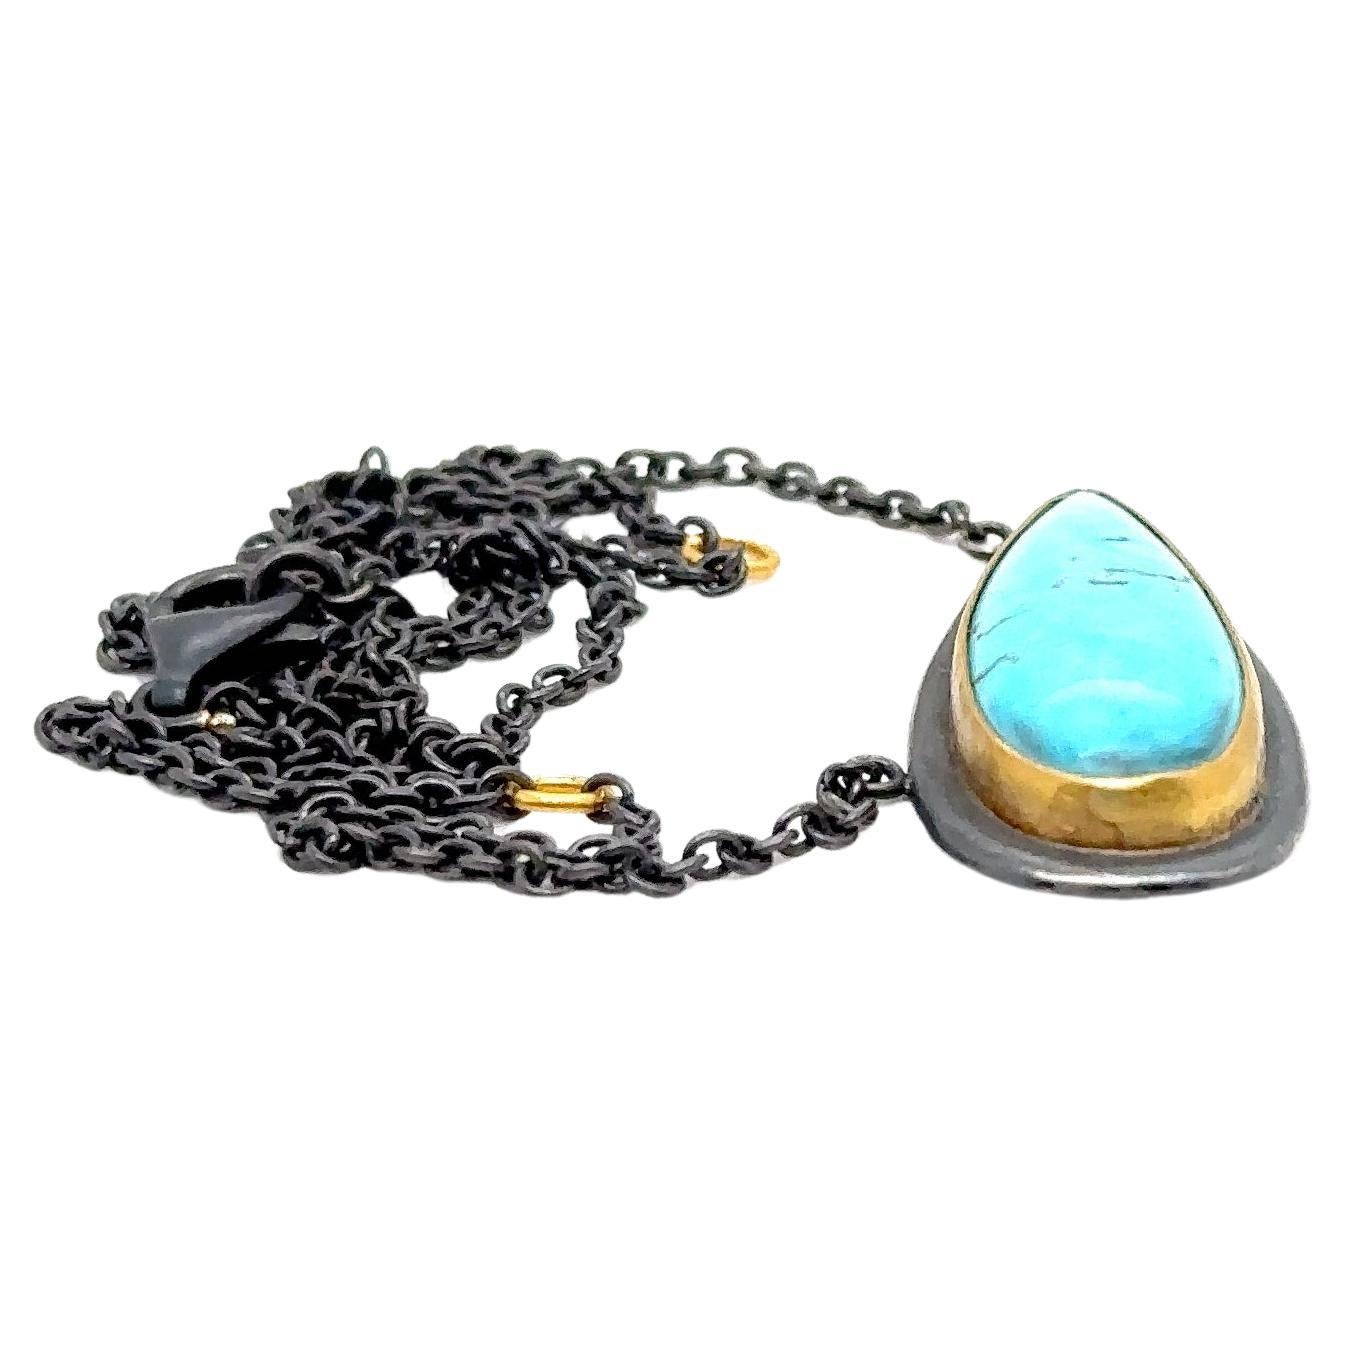 JAS-17-1525 - 24K/SS HANDMADE NECKLACE w 30X10MM NATURAL KINGMAN TURQUOISE  For Sale